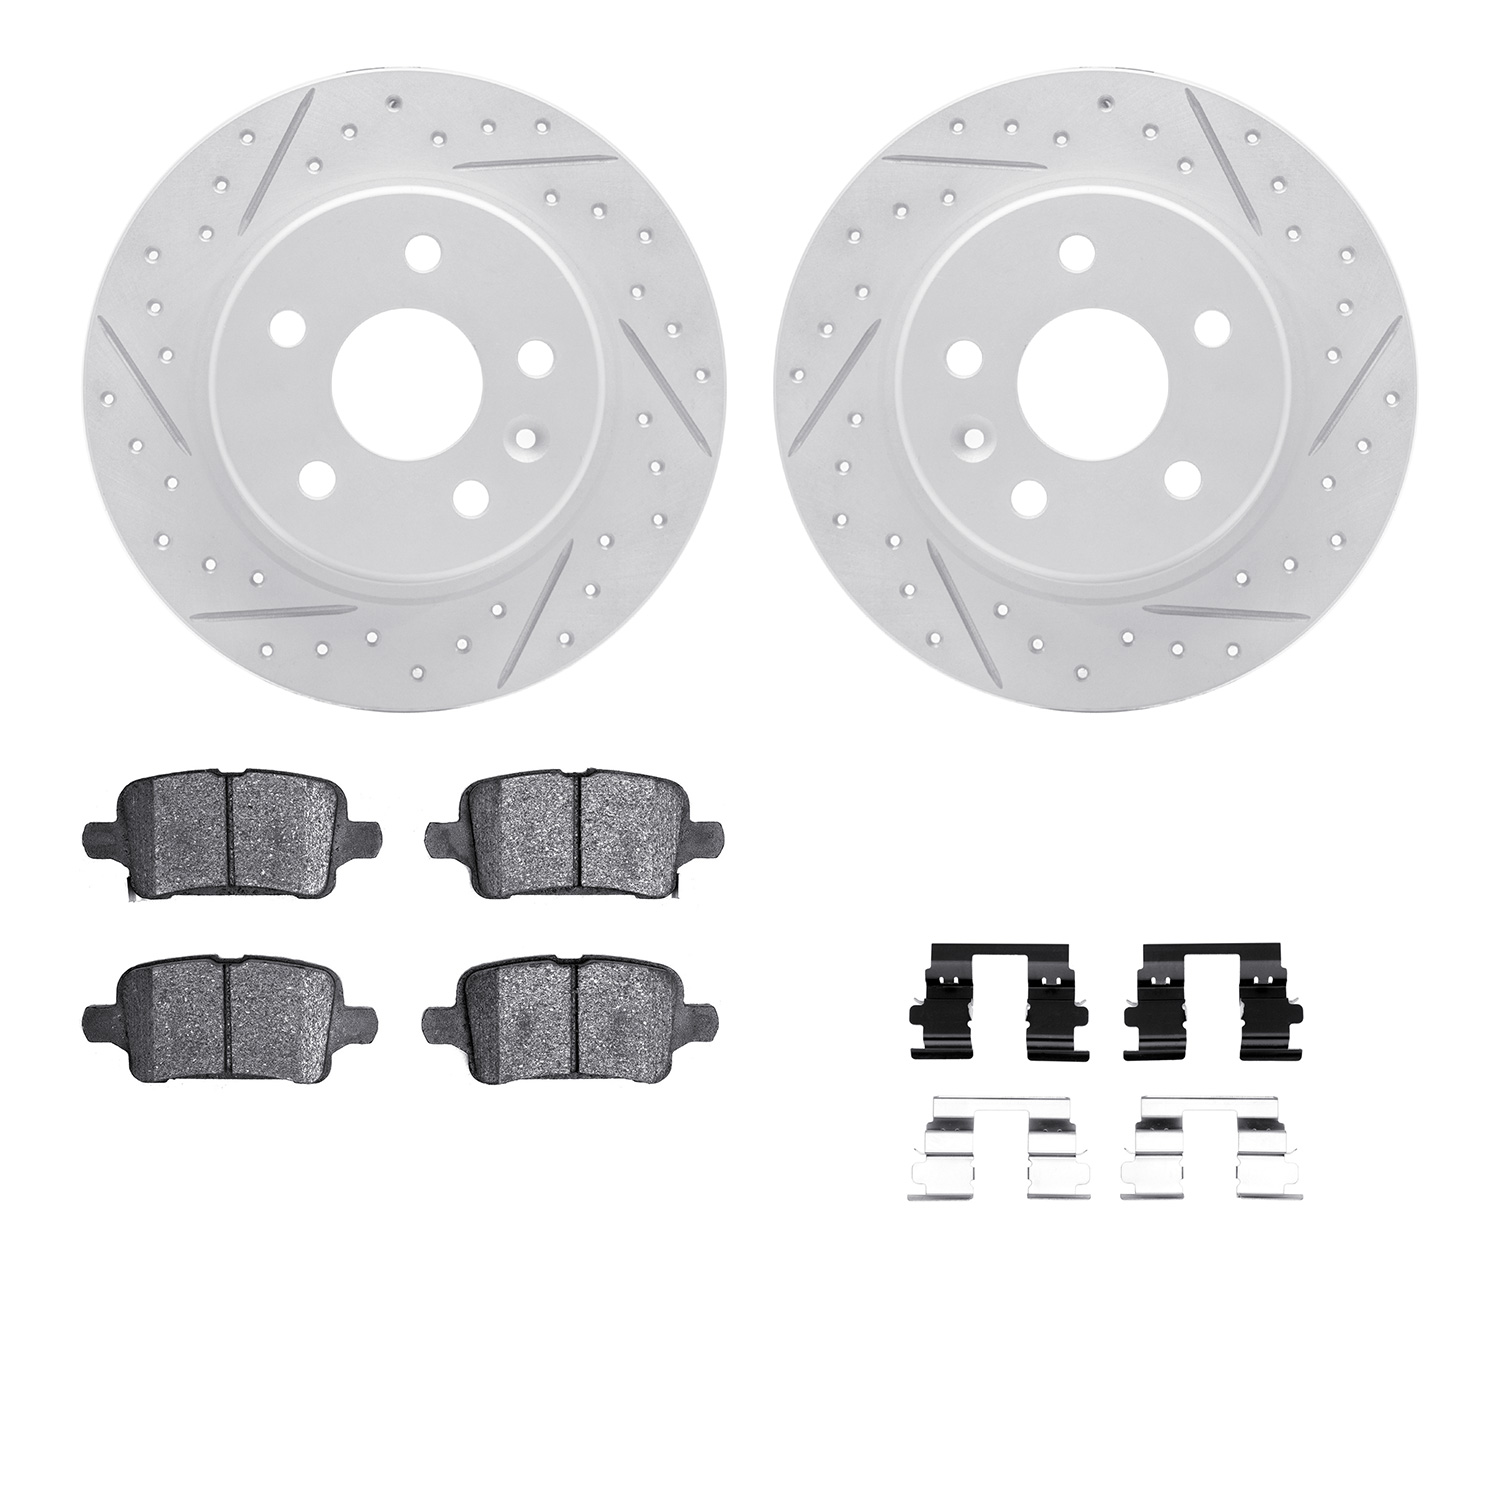 2512-47030 Geoperformance Drilled/Slotted Rotors w/5000 Advanced Brake Pads Kit & Hardware, Fits Select GM, Position: Rear